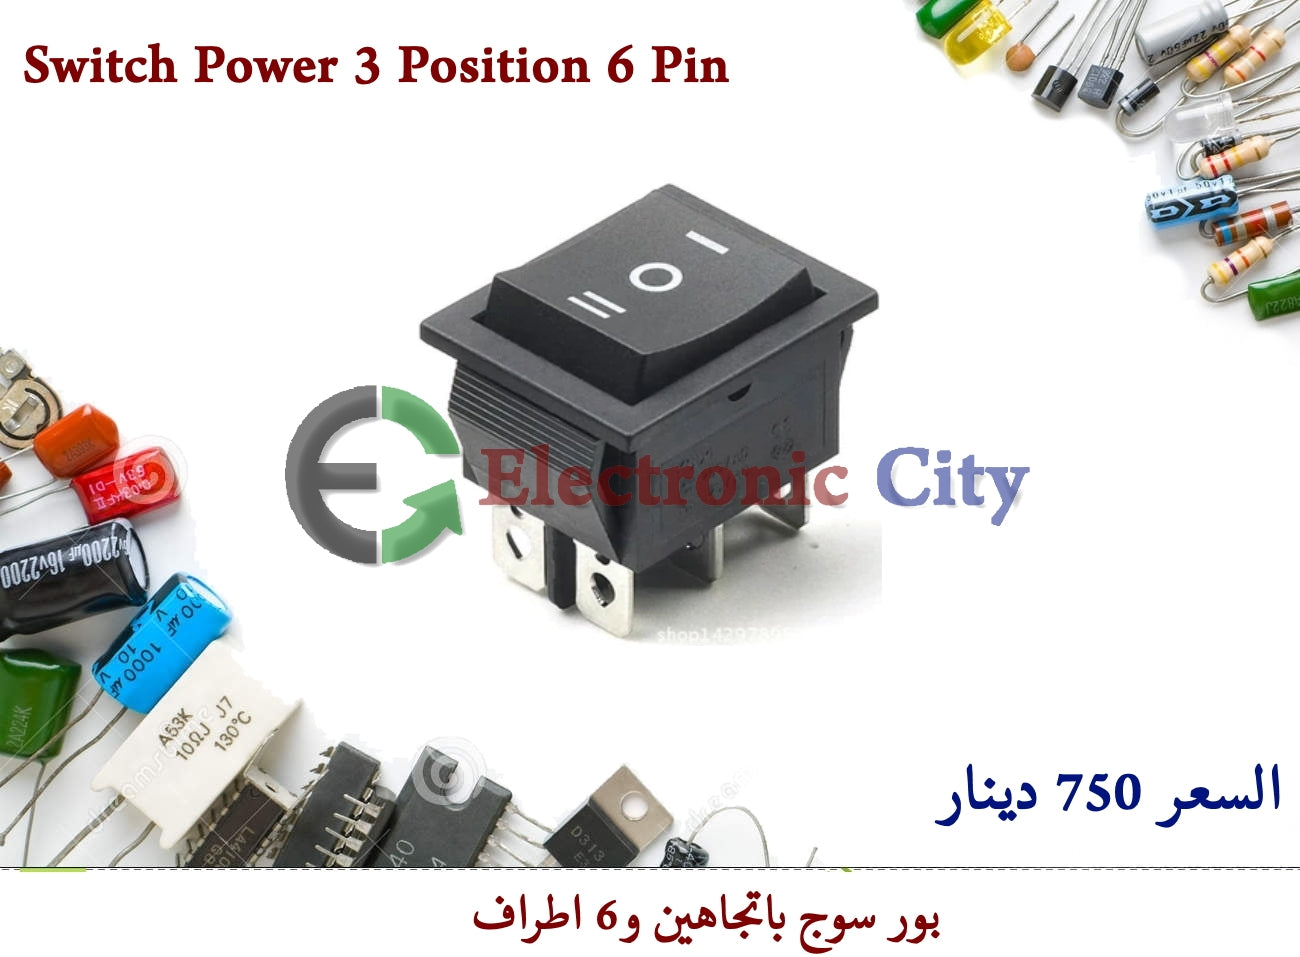 Switch Power 3 Position 6 Pin